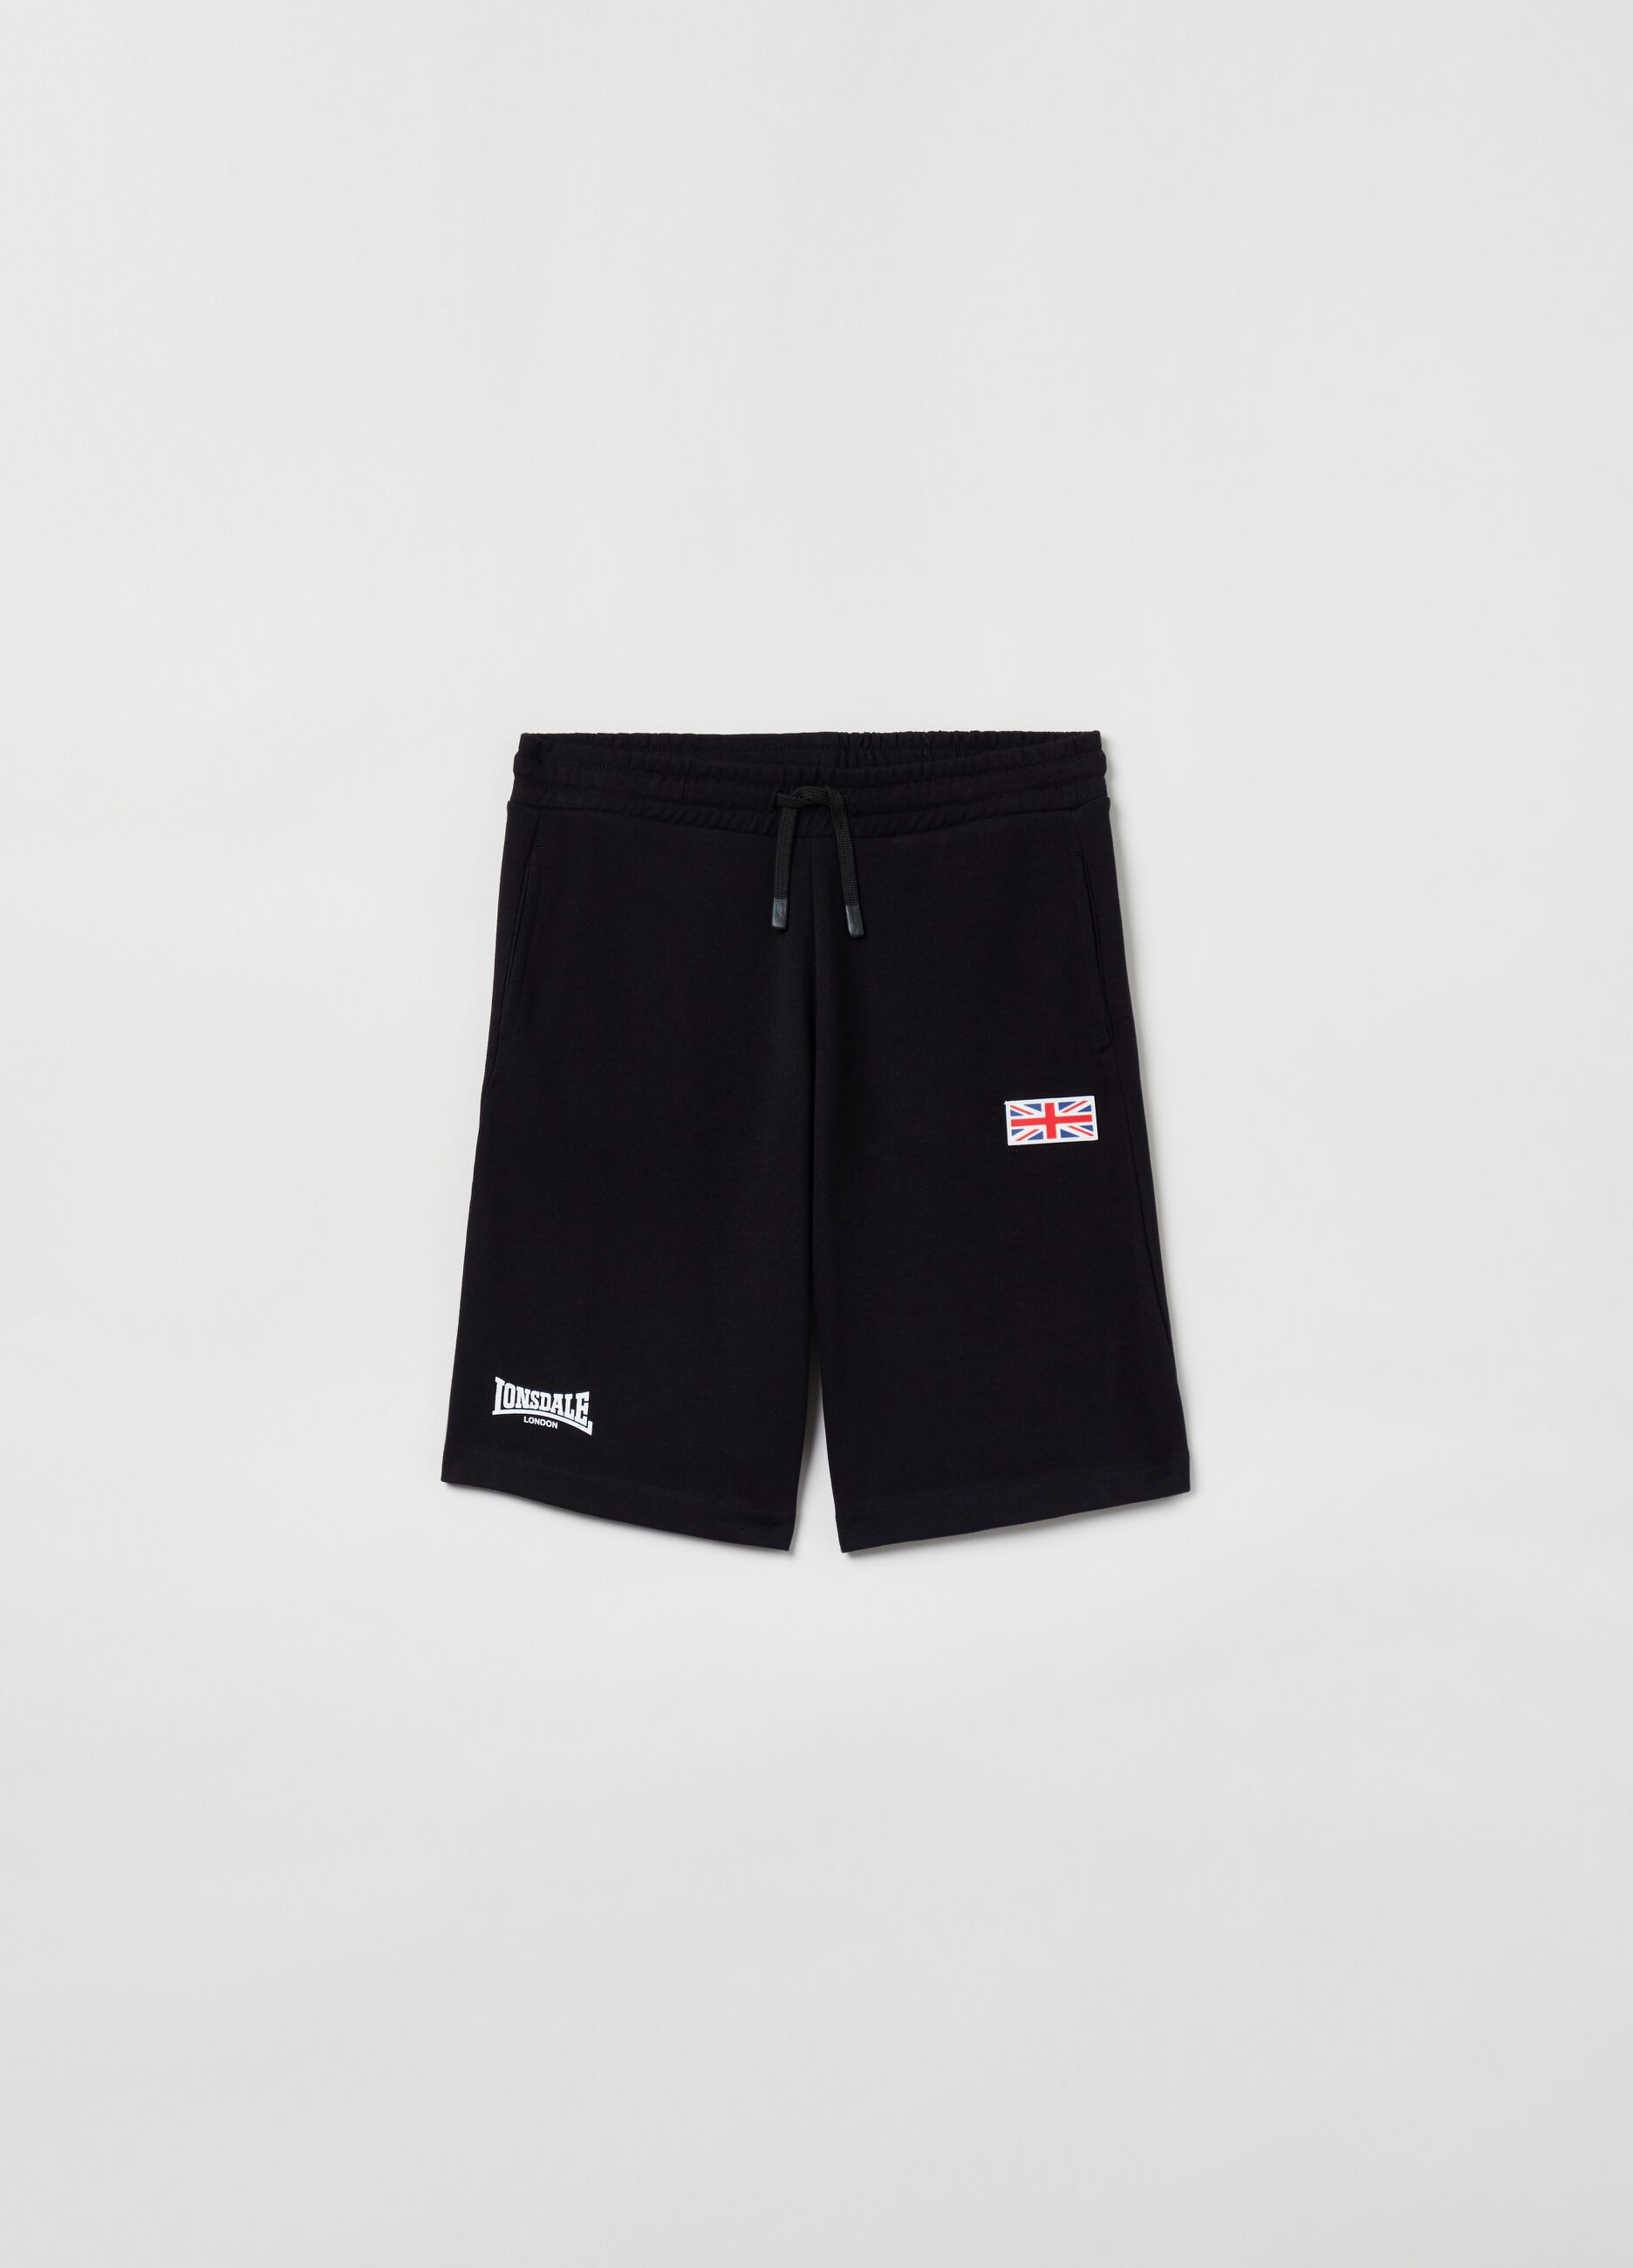 Shorts with drawstring and Lonsdale print